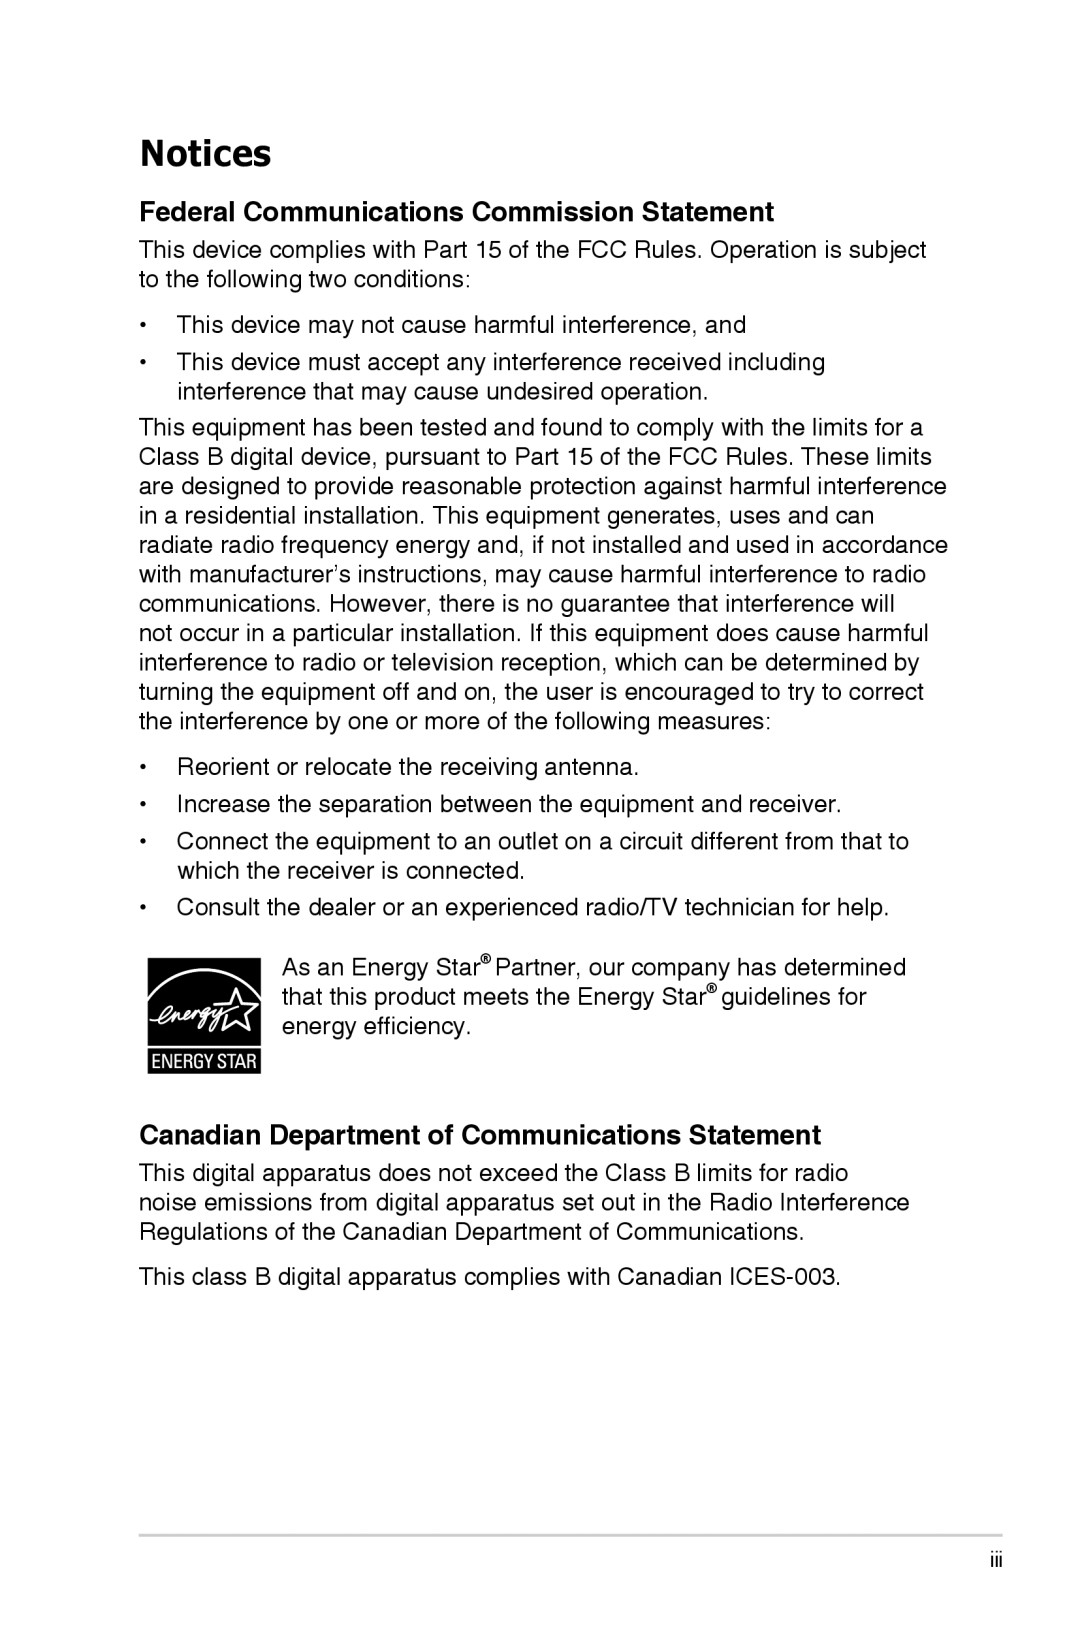 Asus VS207TP manual Notices, Federal Communications Commission Statement, Canadian Department of Communications Statement 